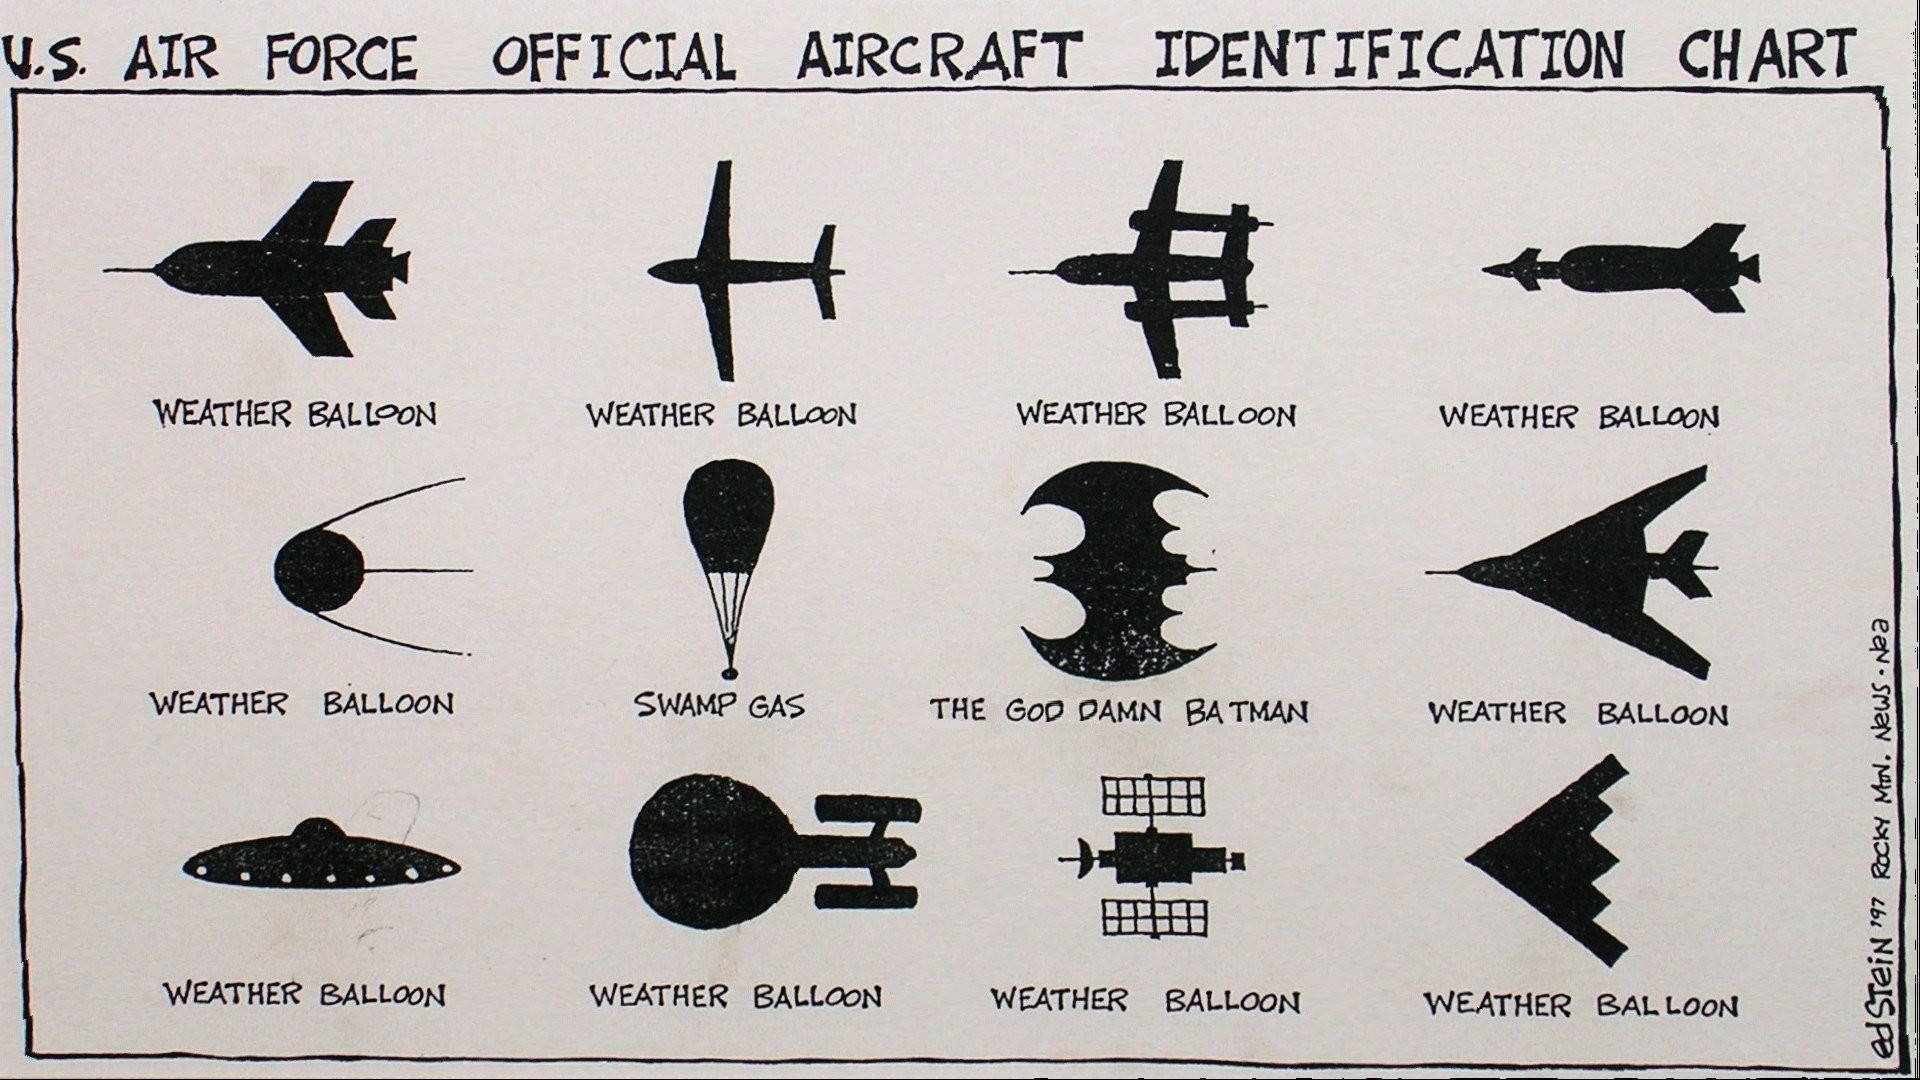 Air Force Mock Identification Chart Background